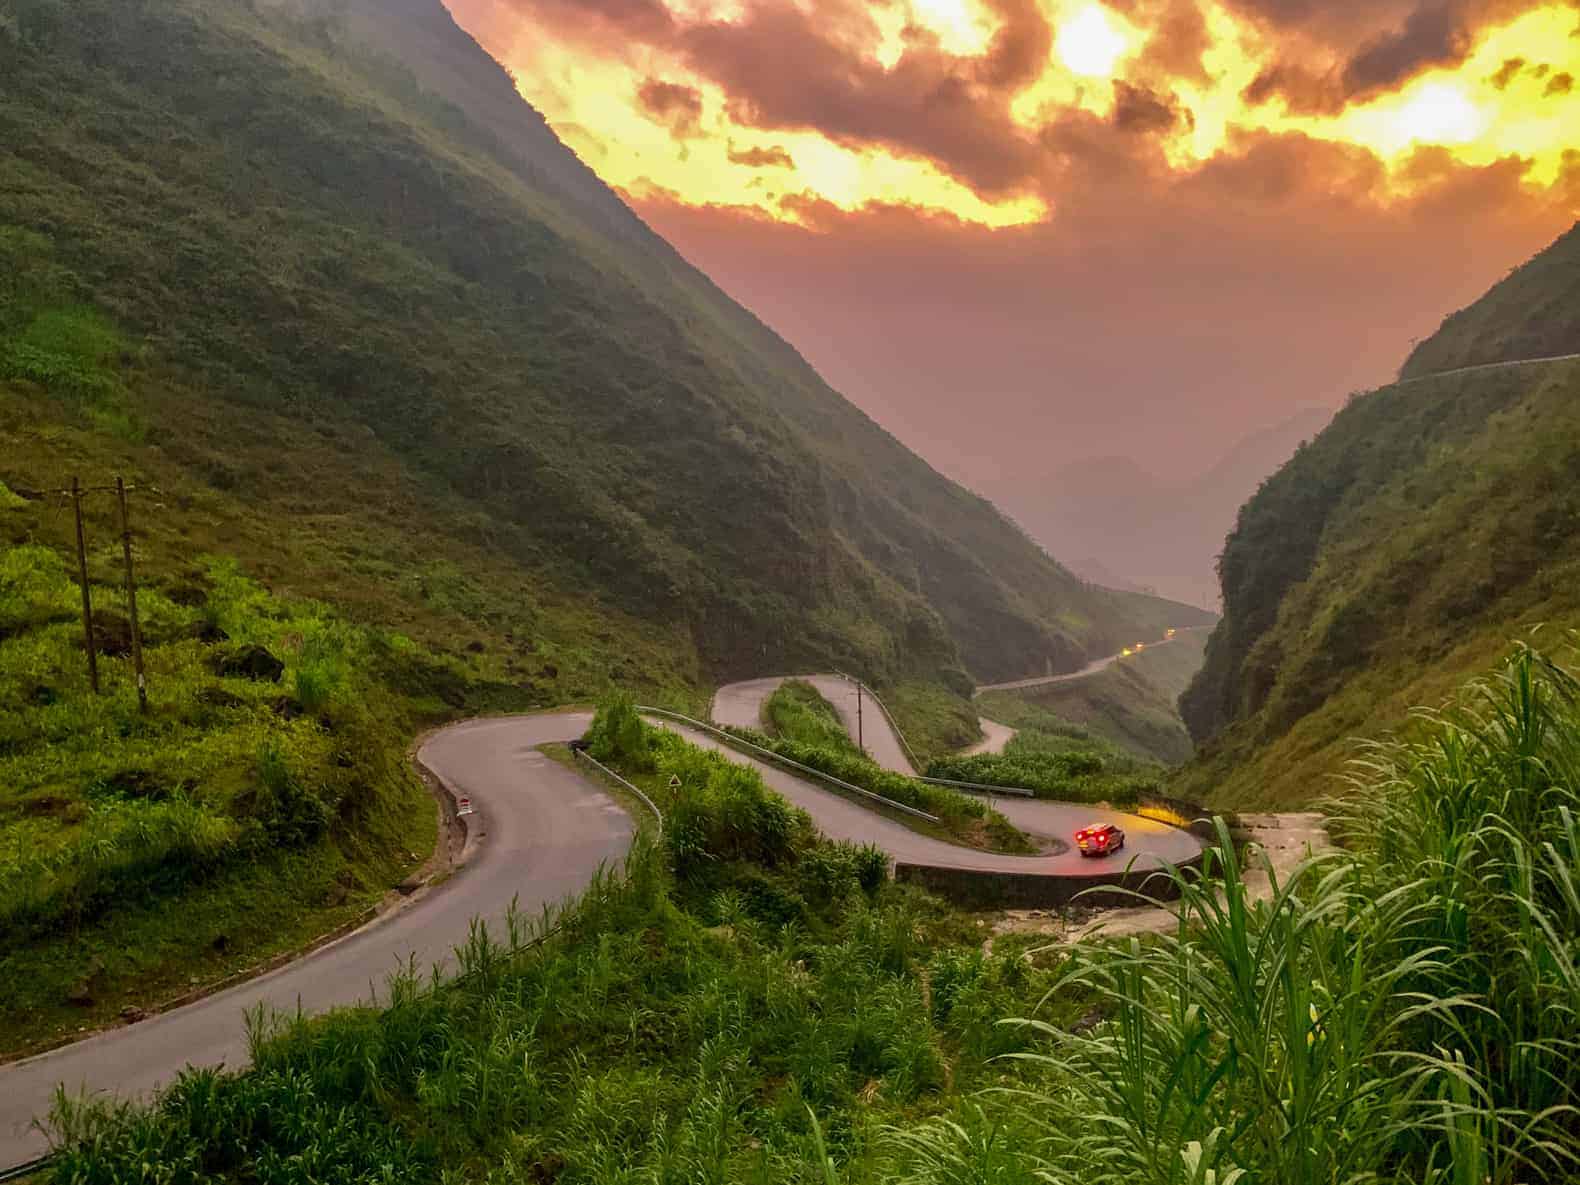 A windy road near Dong Van Karst Plateau on the Ha Giang Motorbike loop at sunset in North Vietnam Highlands.